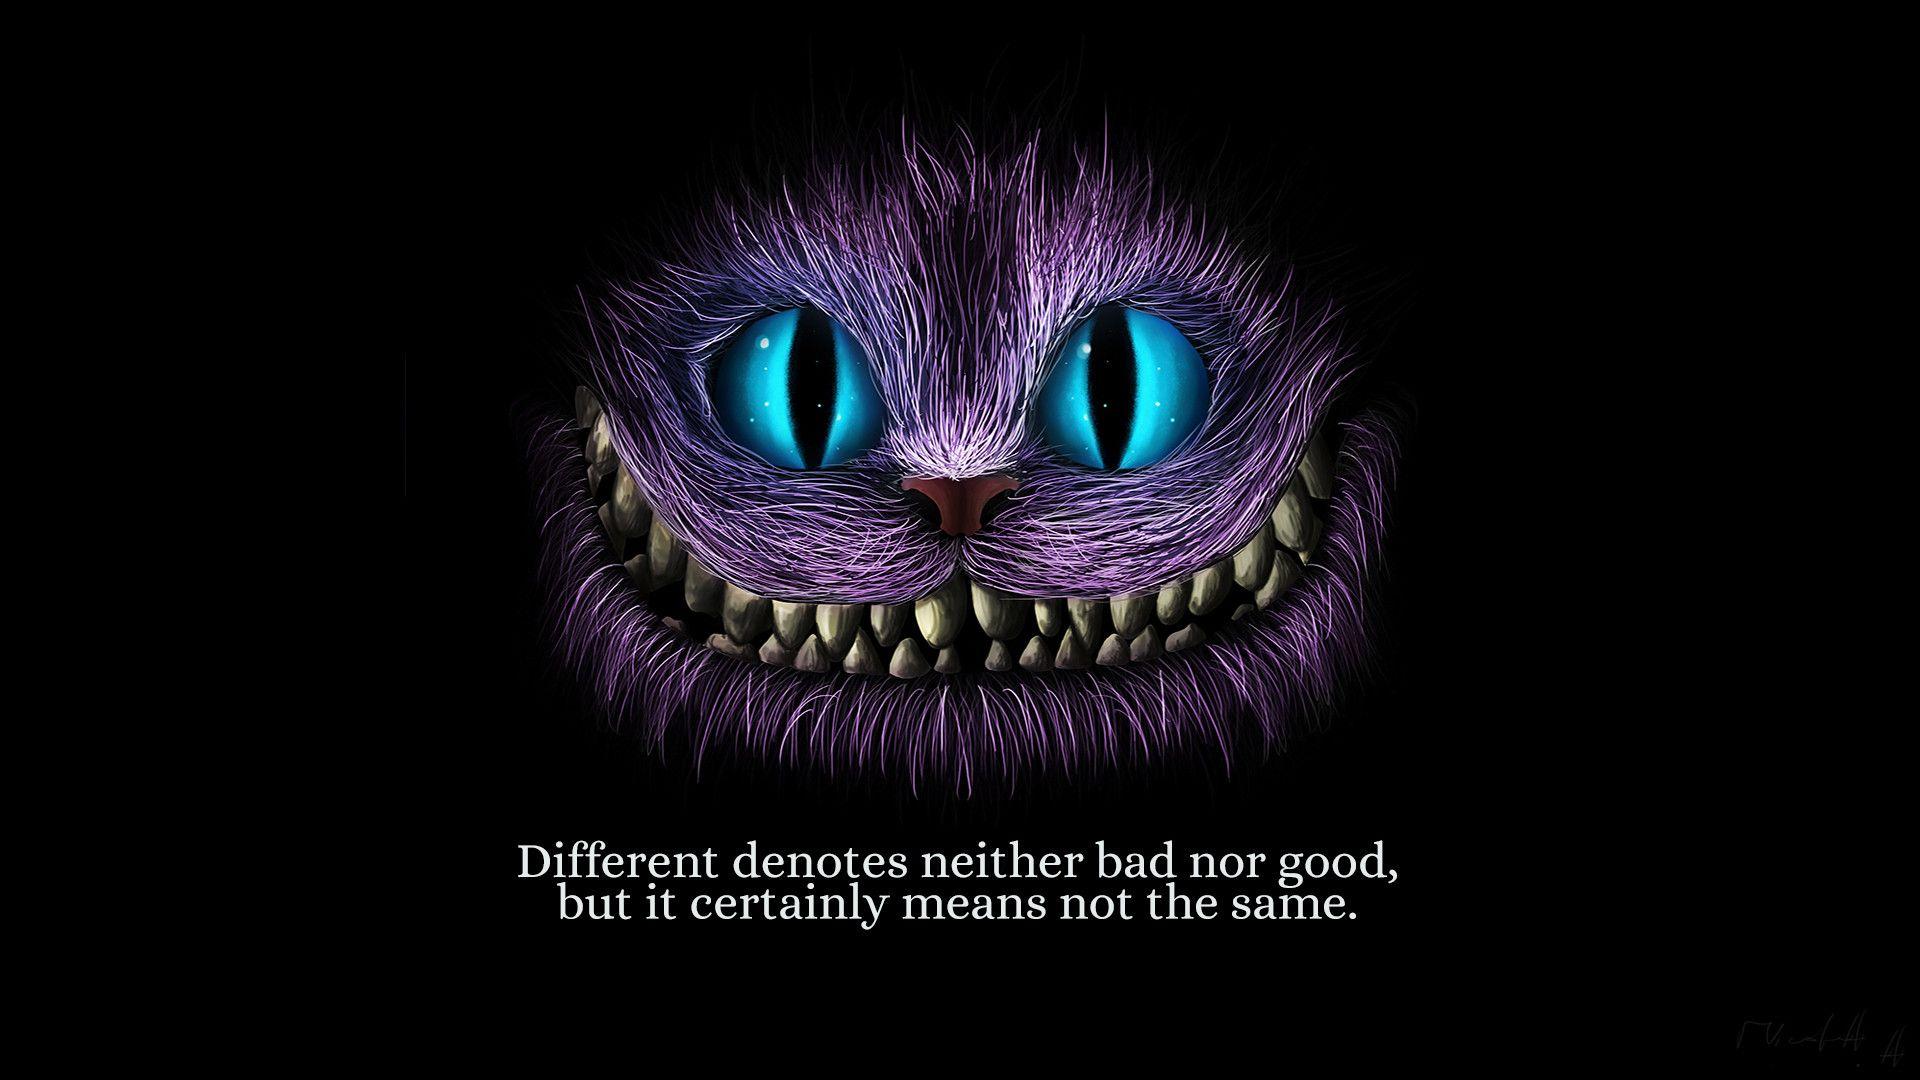 Cheshire Cat Wallpapers - Top Free Cheshire Cat Backgrounds